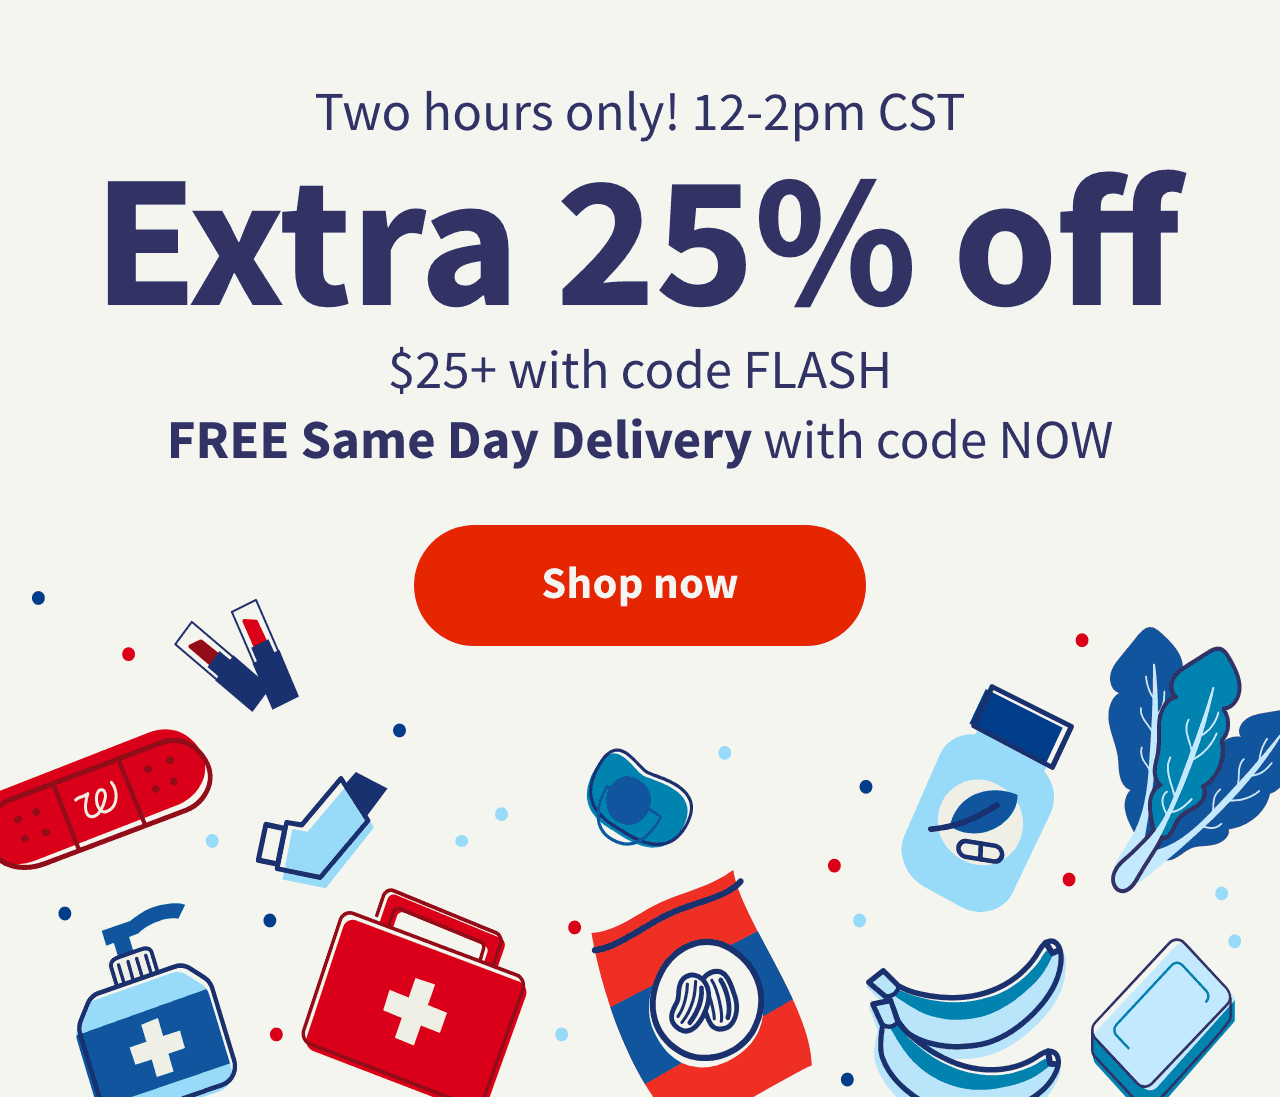 Two hours only! 12-2pm CST. Extra 25% off $25+ with code FLASH. FREE Same Day Delivery with code NOW. Shop now